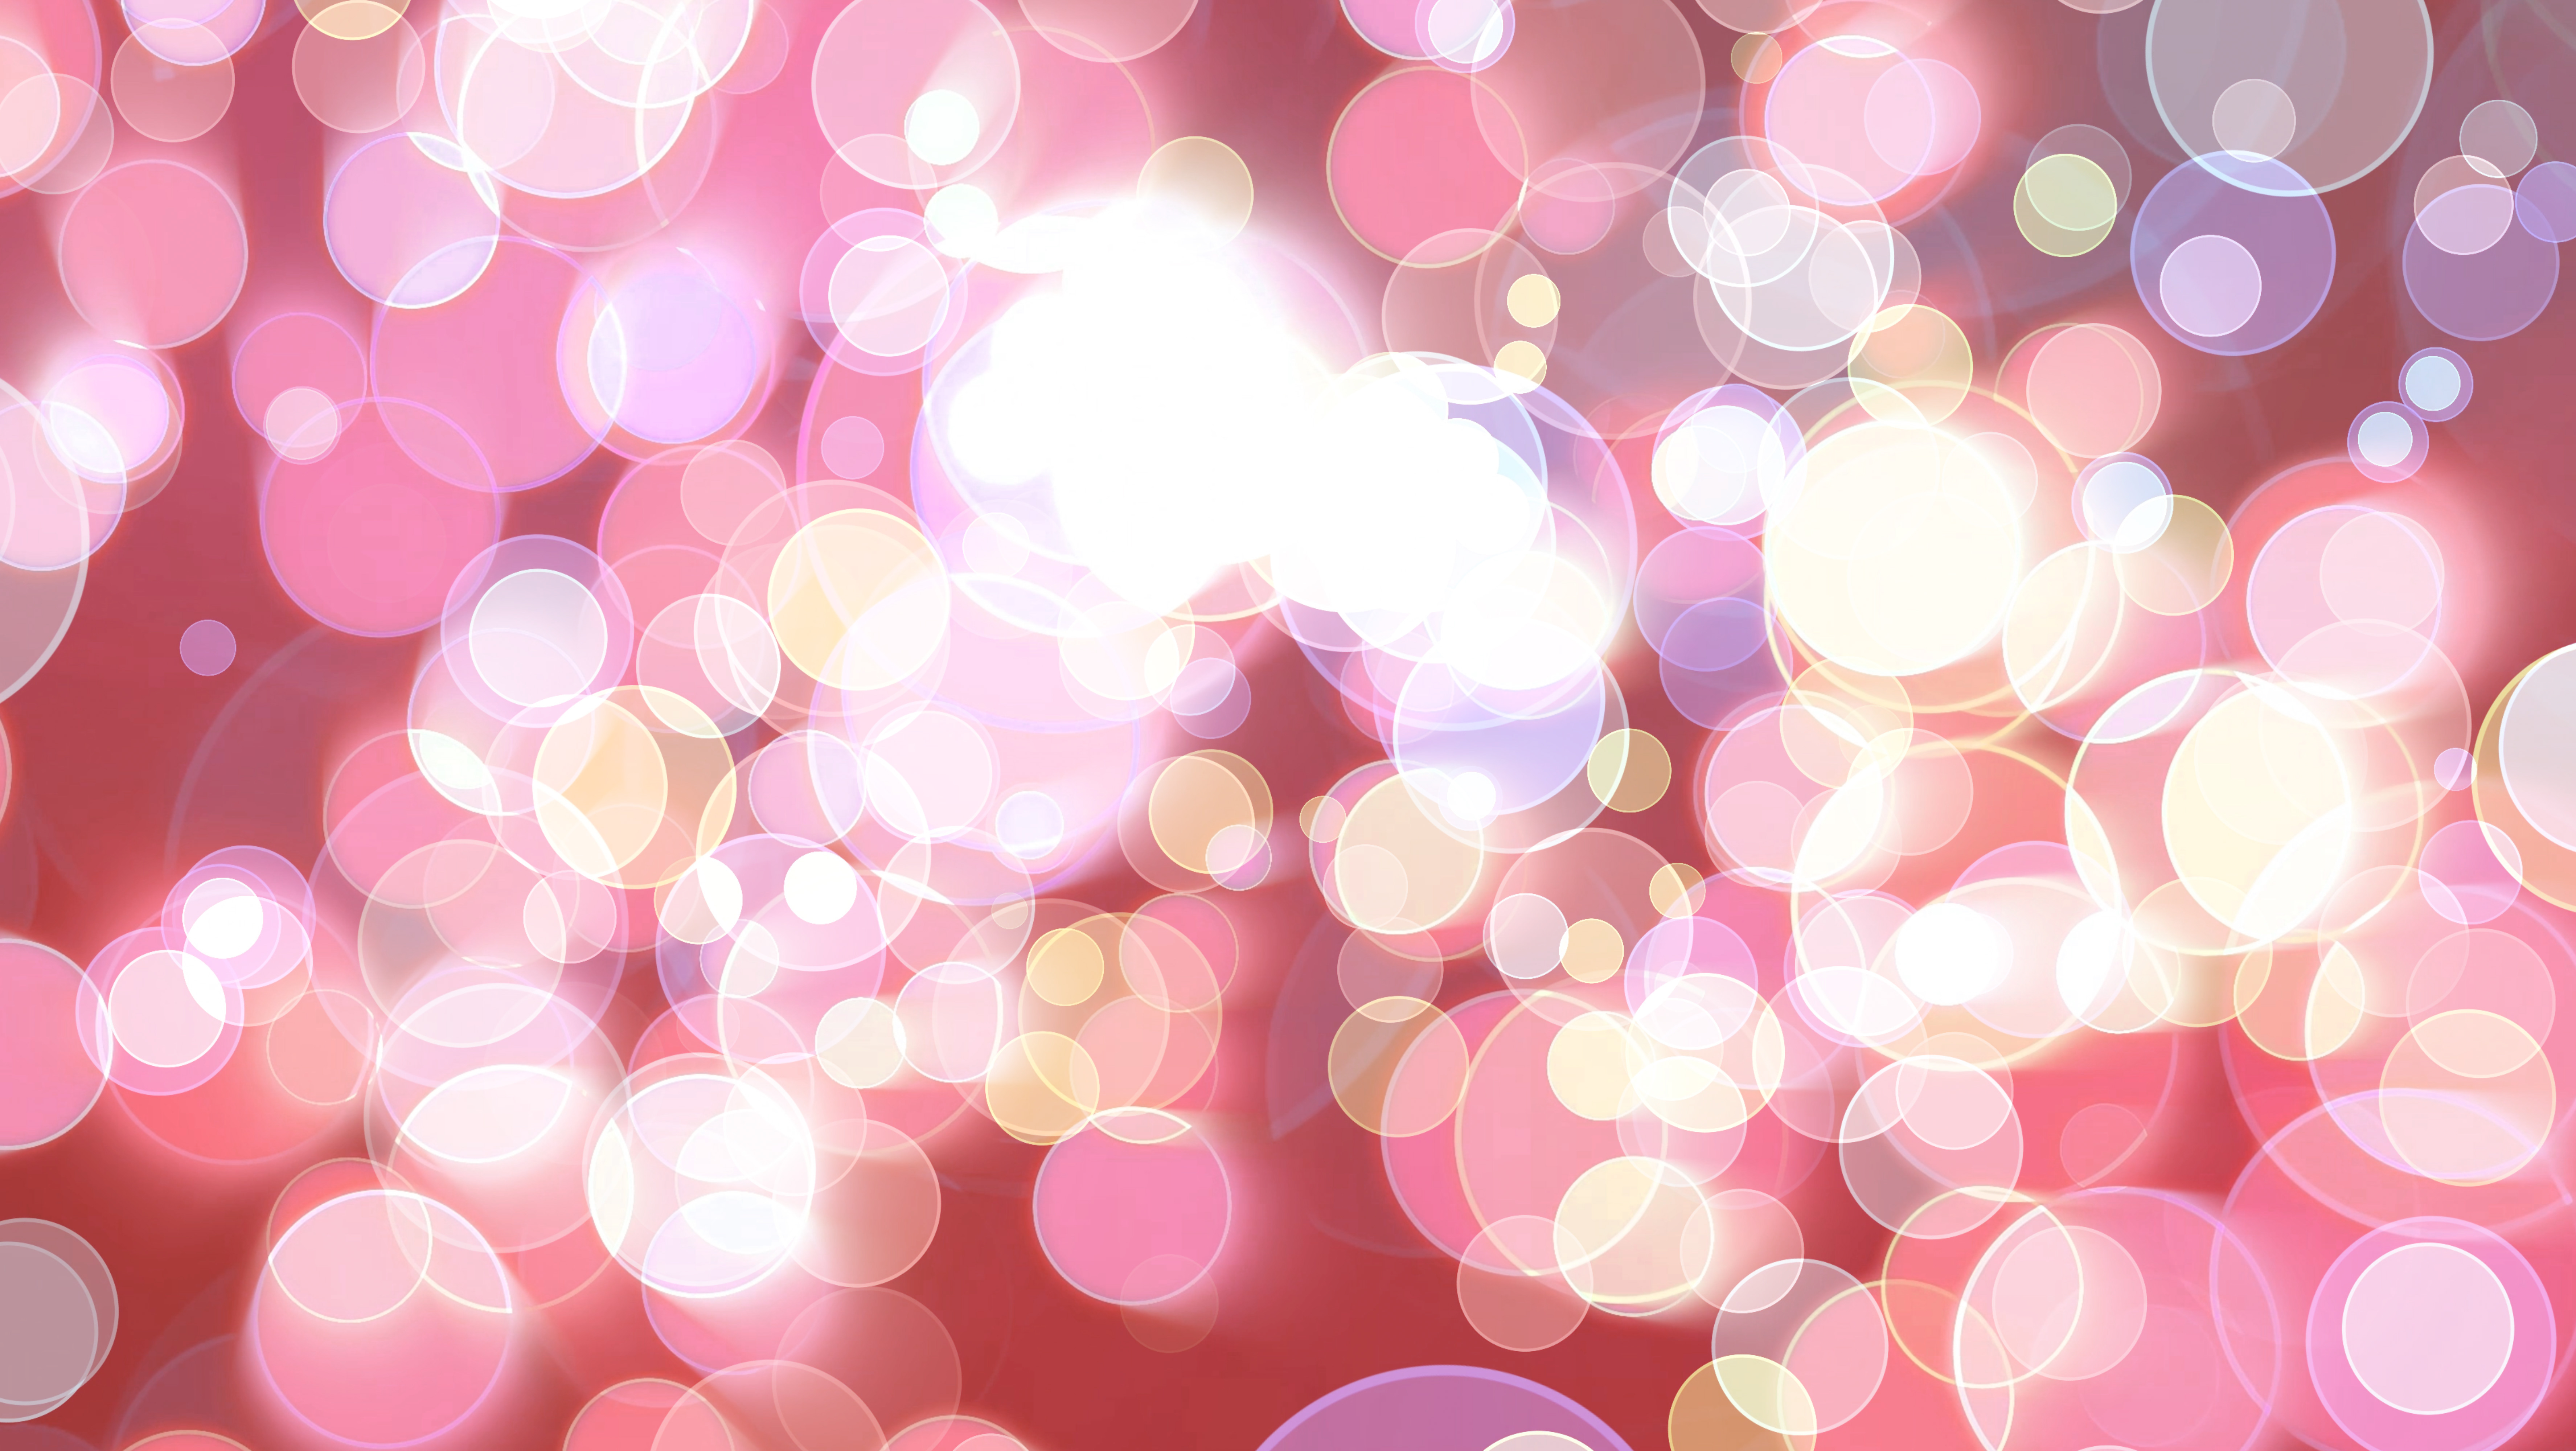 Pink Bubbles Stock Photos, Images and Backgrounds for Free Download